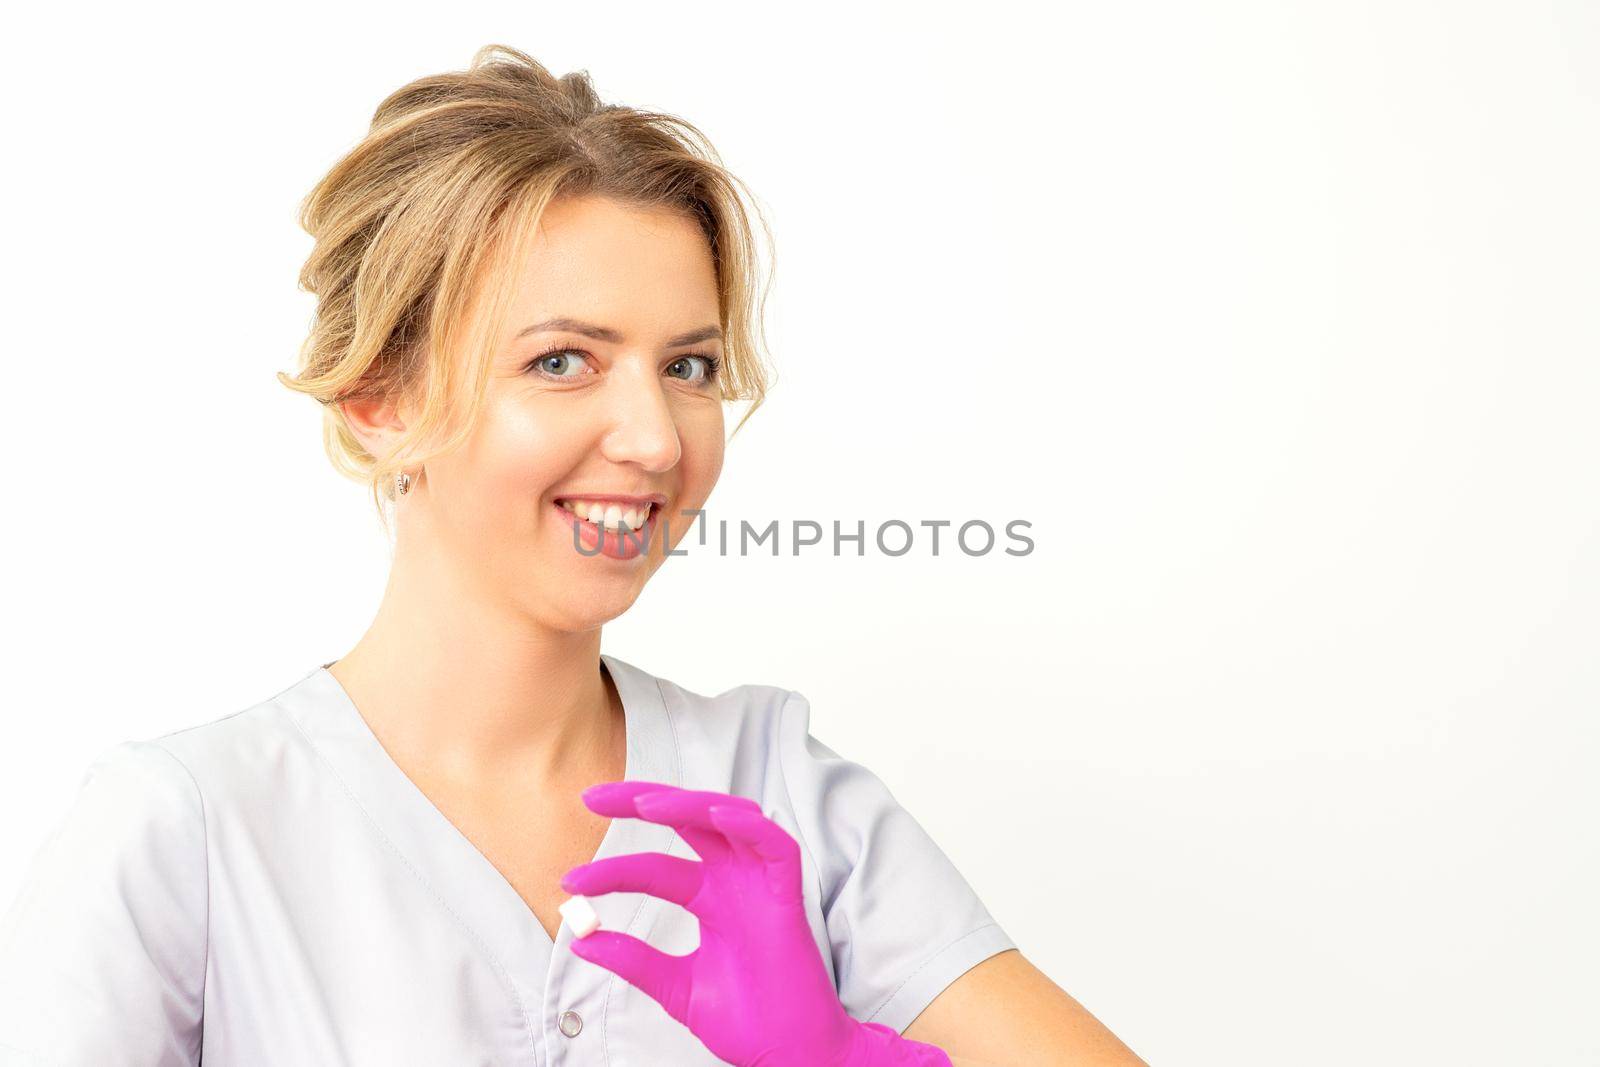 Portrait of a young smiling Caucasian beautician wearing pink gloves holding sugar cubes showing and looking at the camera against a white background